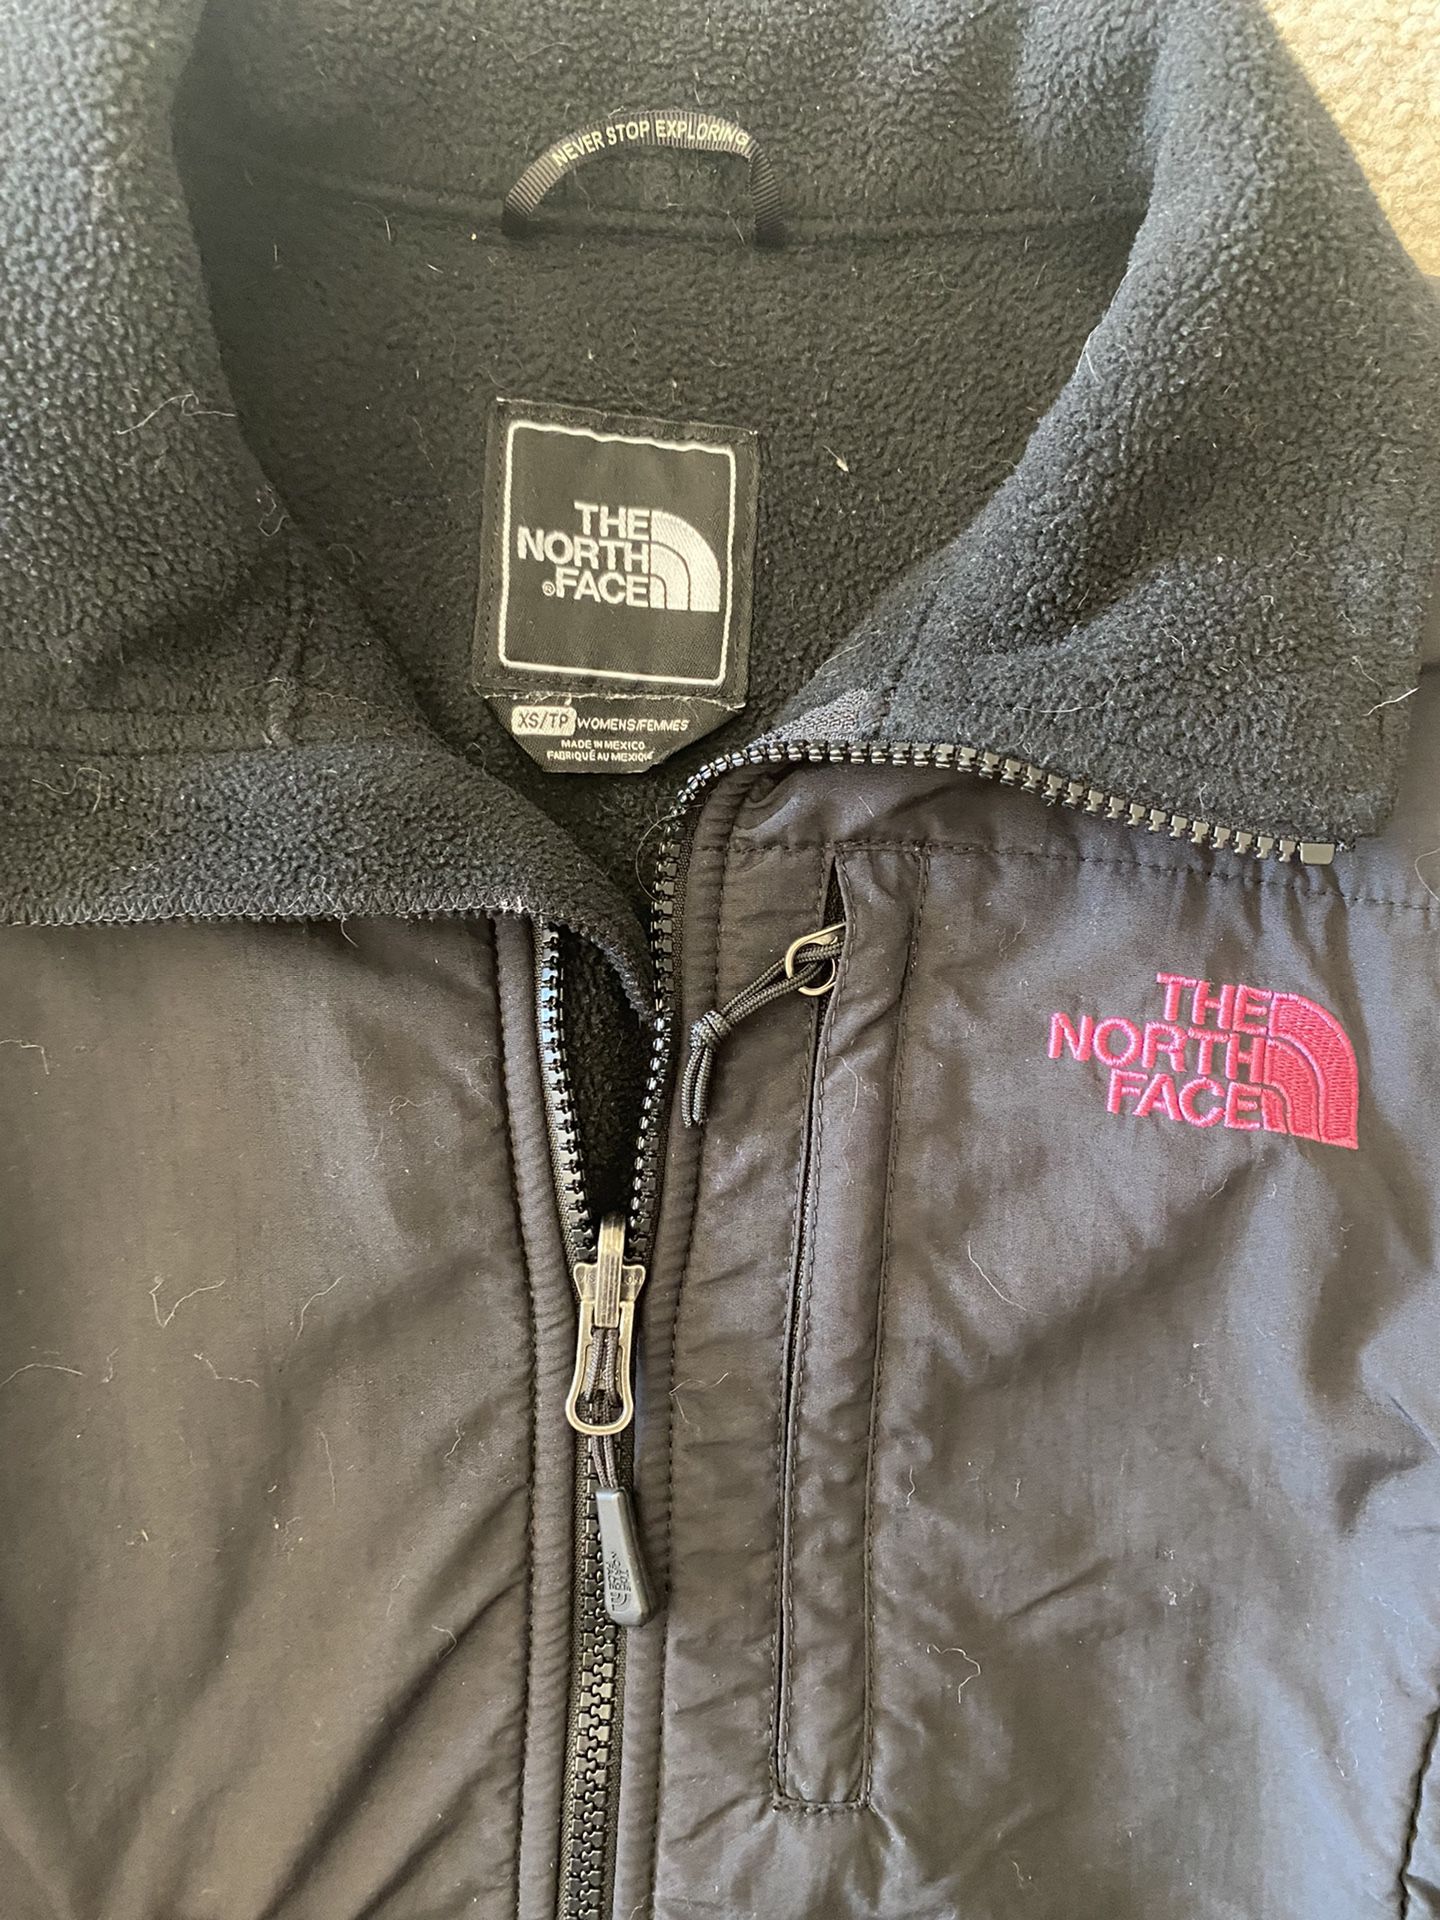 North Face Breast Cancer Awareness Jacket